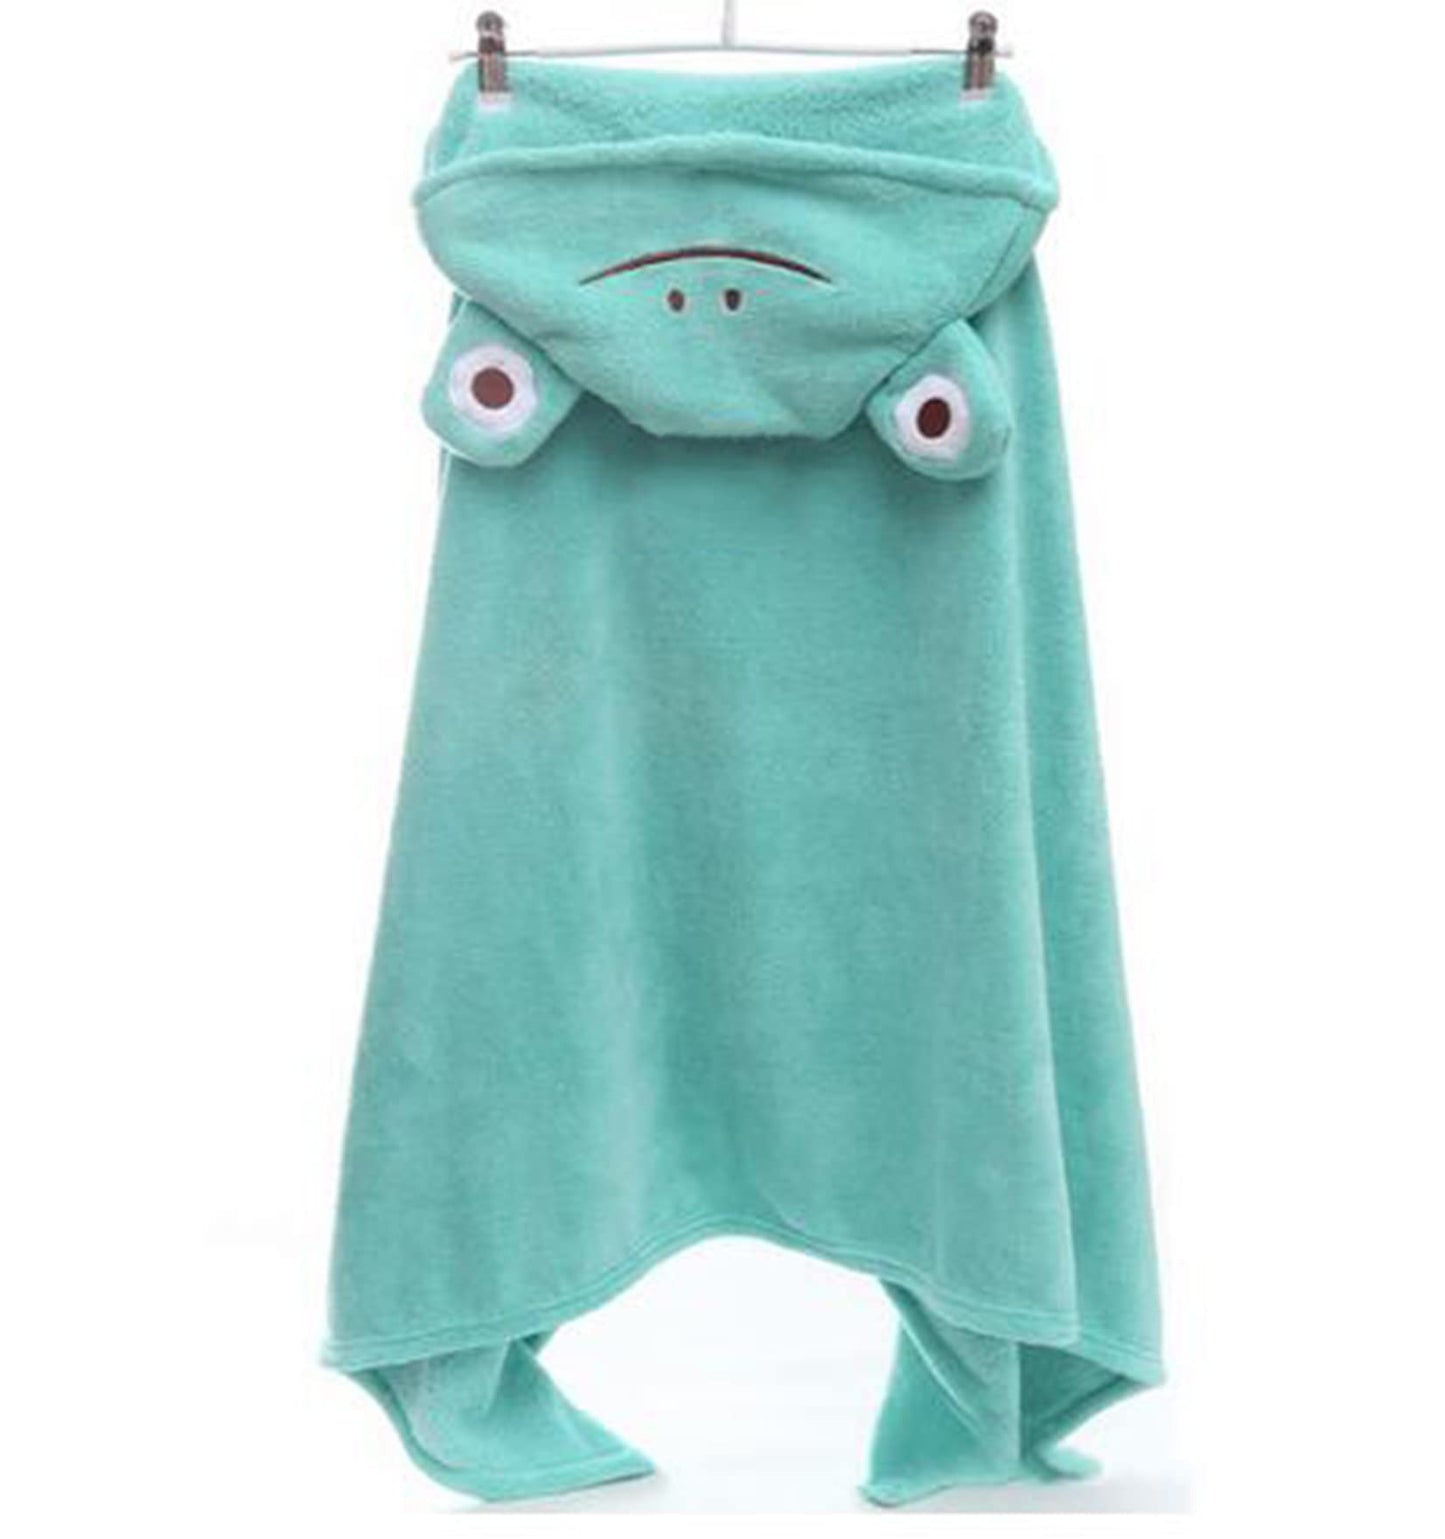 ROMASA Baby Bath Towel Ultra Soft Hooded Towel Highly Absorbent Bathrobe Blanket Toddlers Shower Gifts for Boys Girls- 27.5" x 55" (Green)